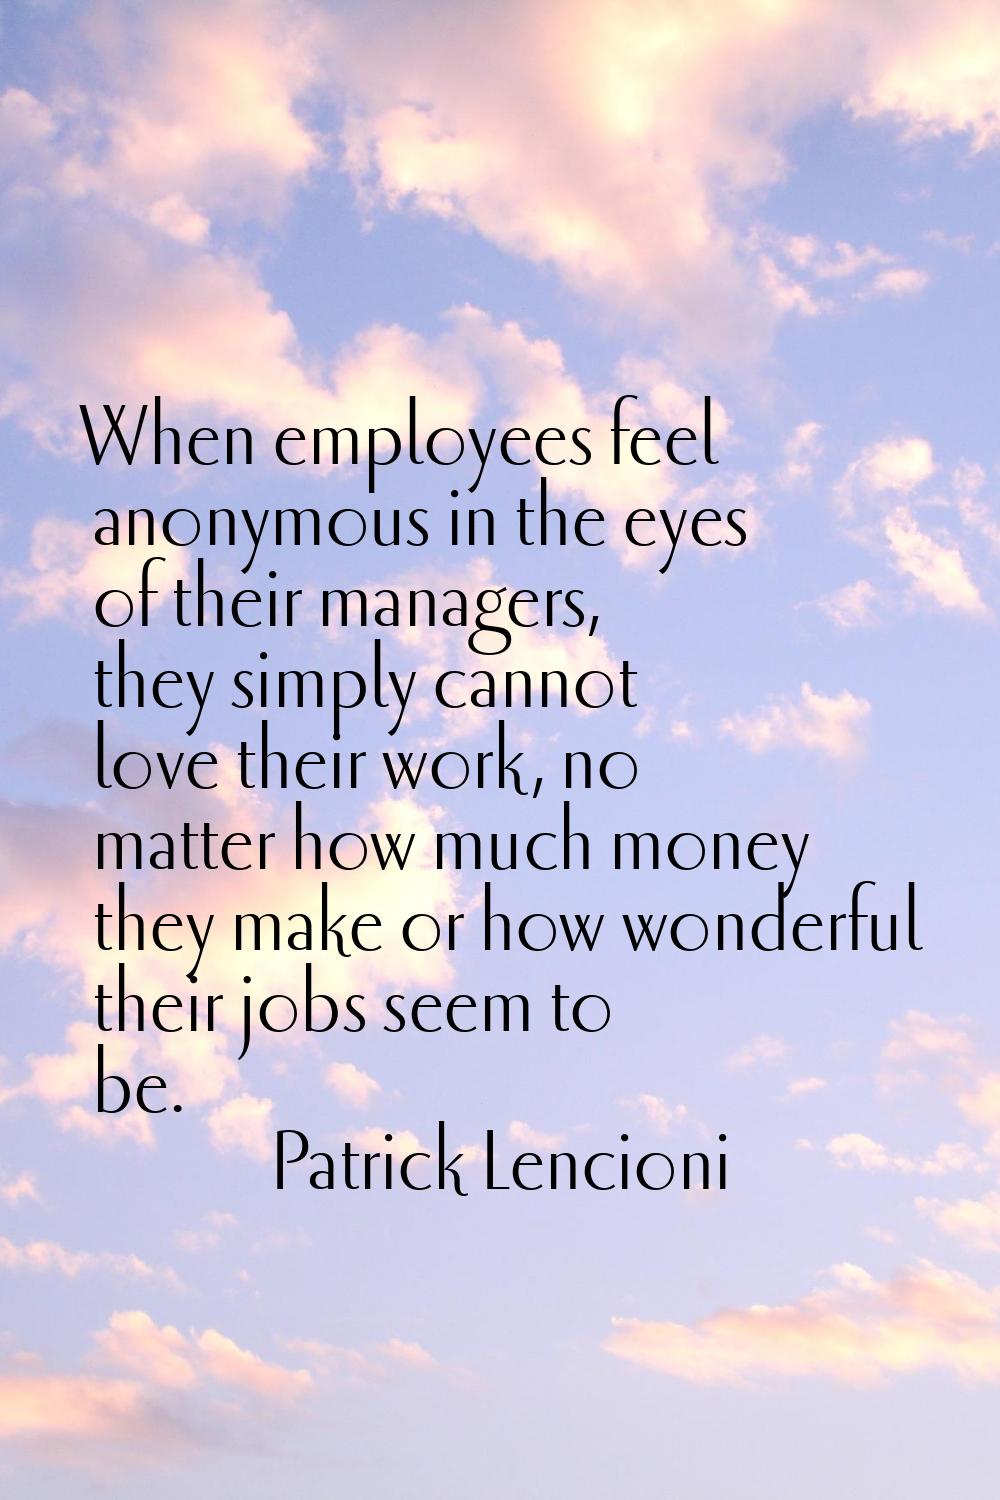 When employees feel anonymous in the eyes of their managers, they simply cannot love their work, no